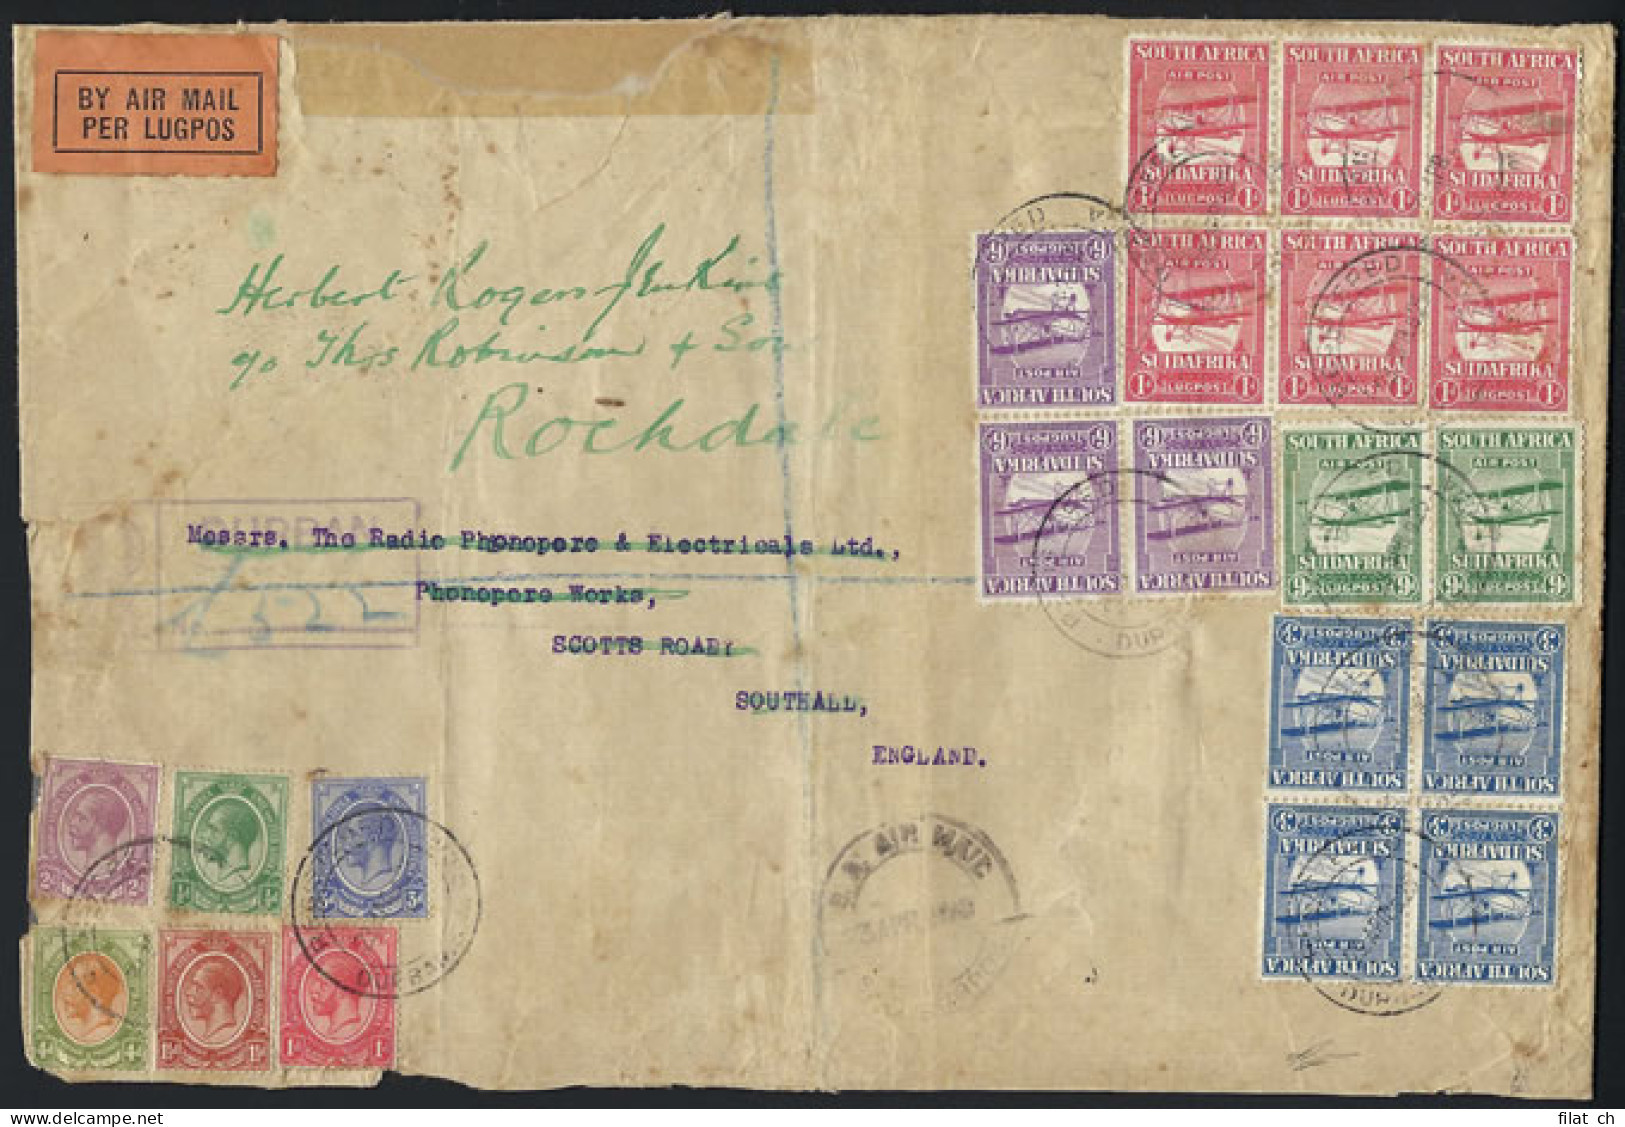 South Africa 1925 Airs Spectacular Multiple Franking, Commercial - Luftpost